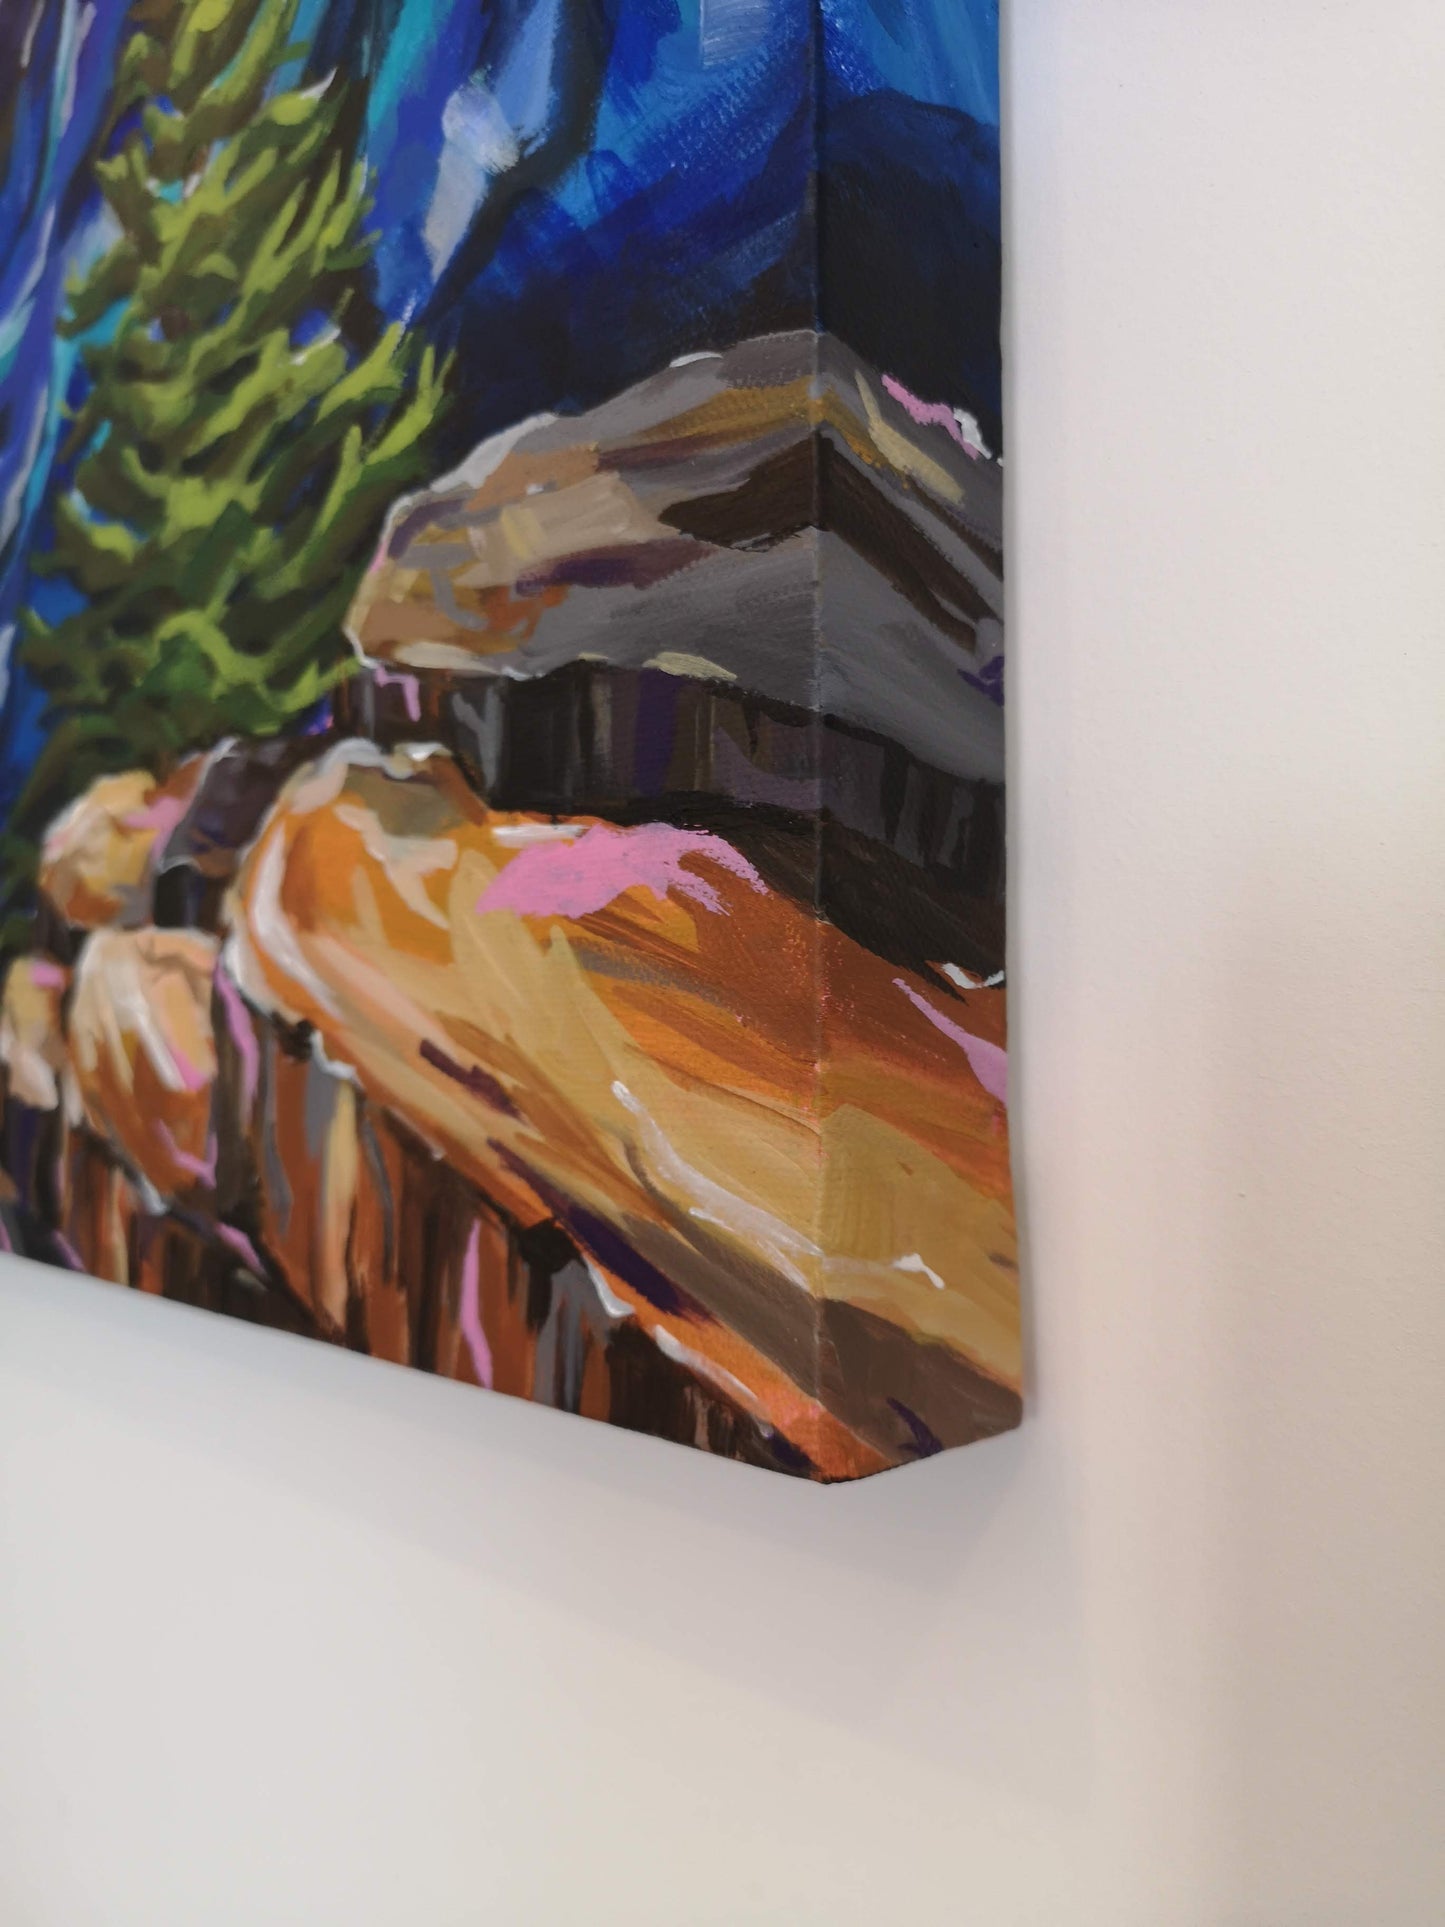 Side view of Vibrant, colourful Abstract Landscape painting by Judy Century showing painting wrapped around edges of box canvas.